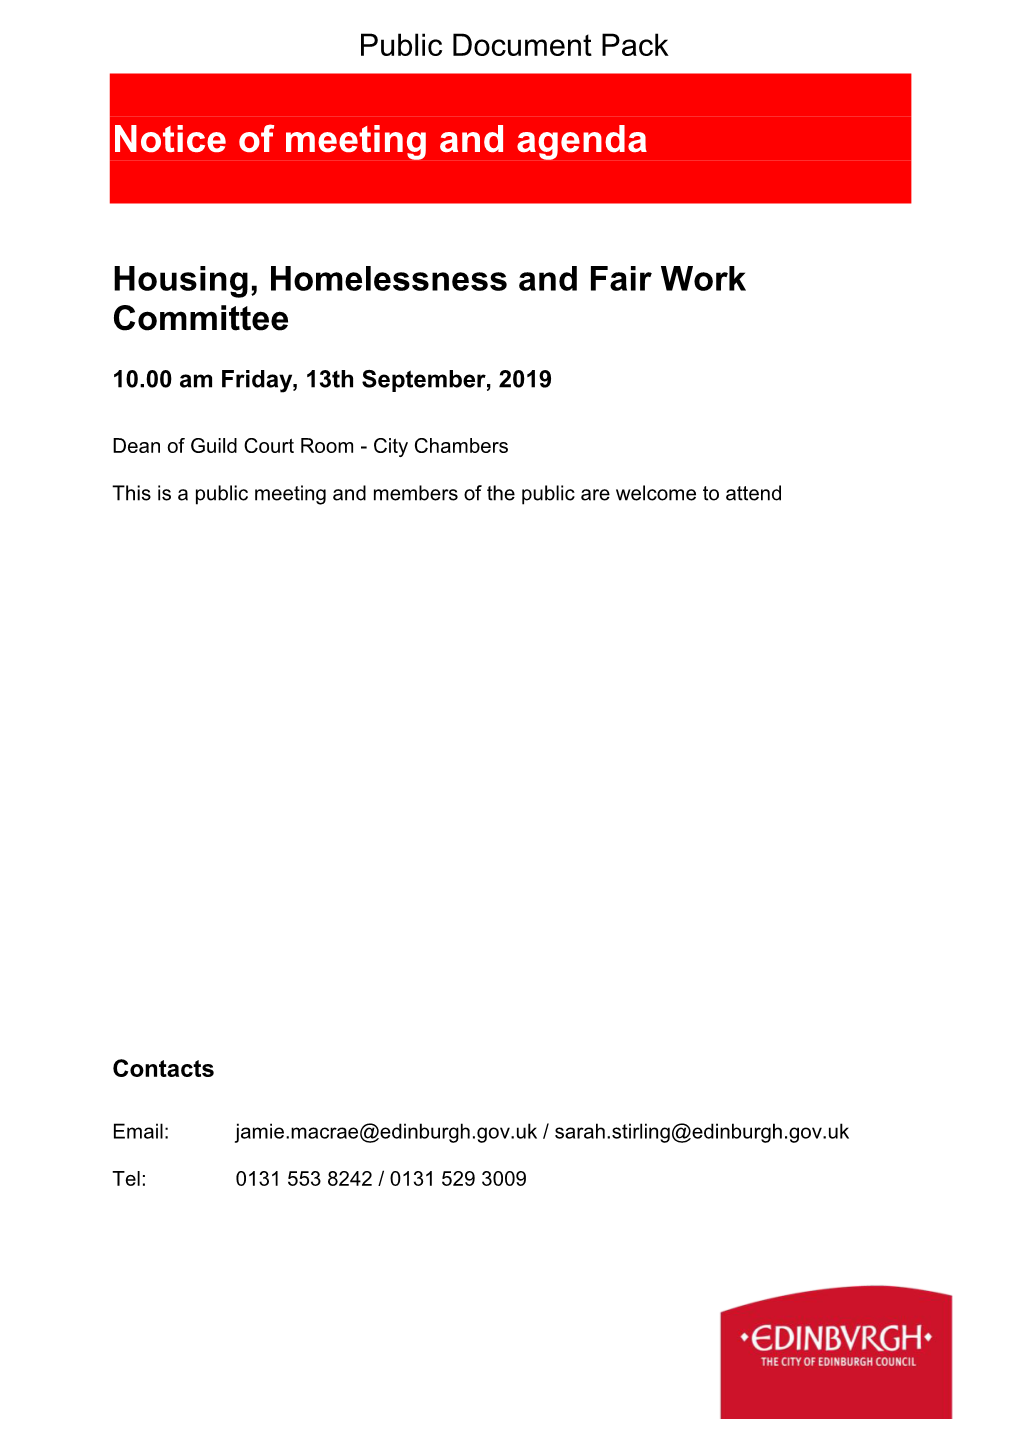 (Public Pack)Agenda Document for Housing, Homelessness and Fair Work Committee, 13/09/2019 10:00